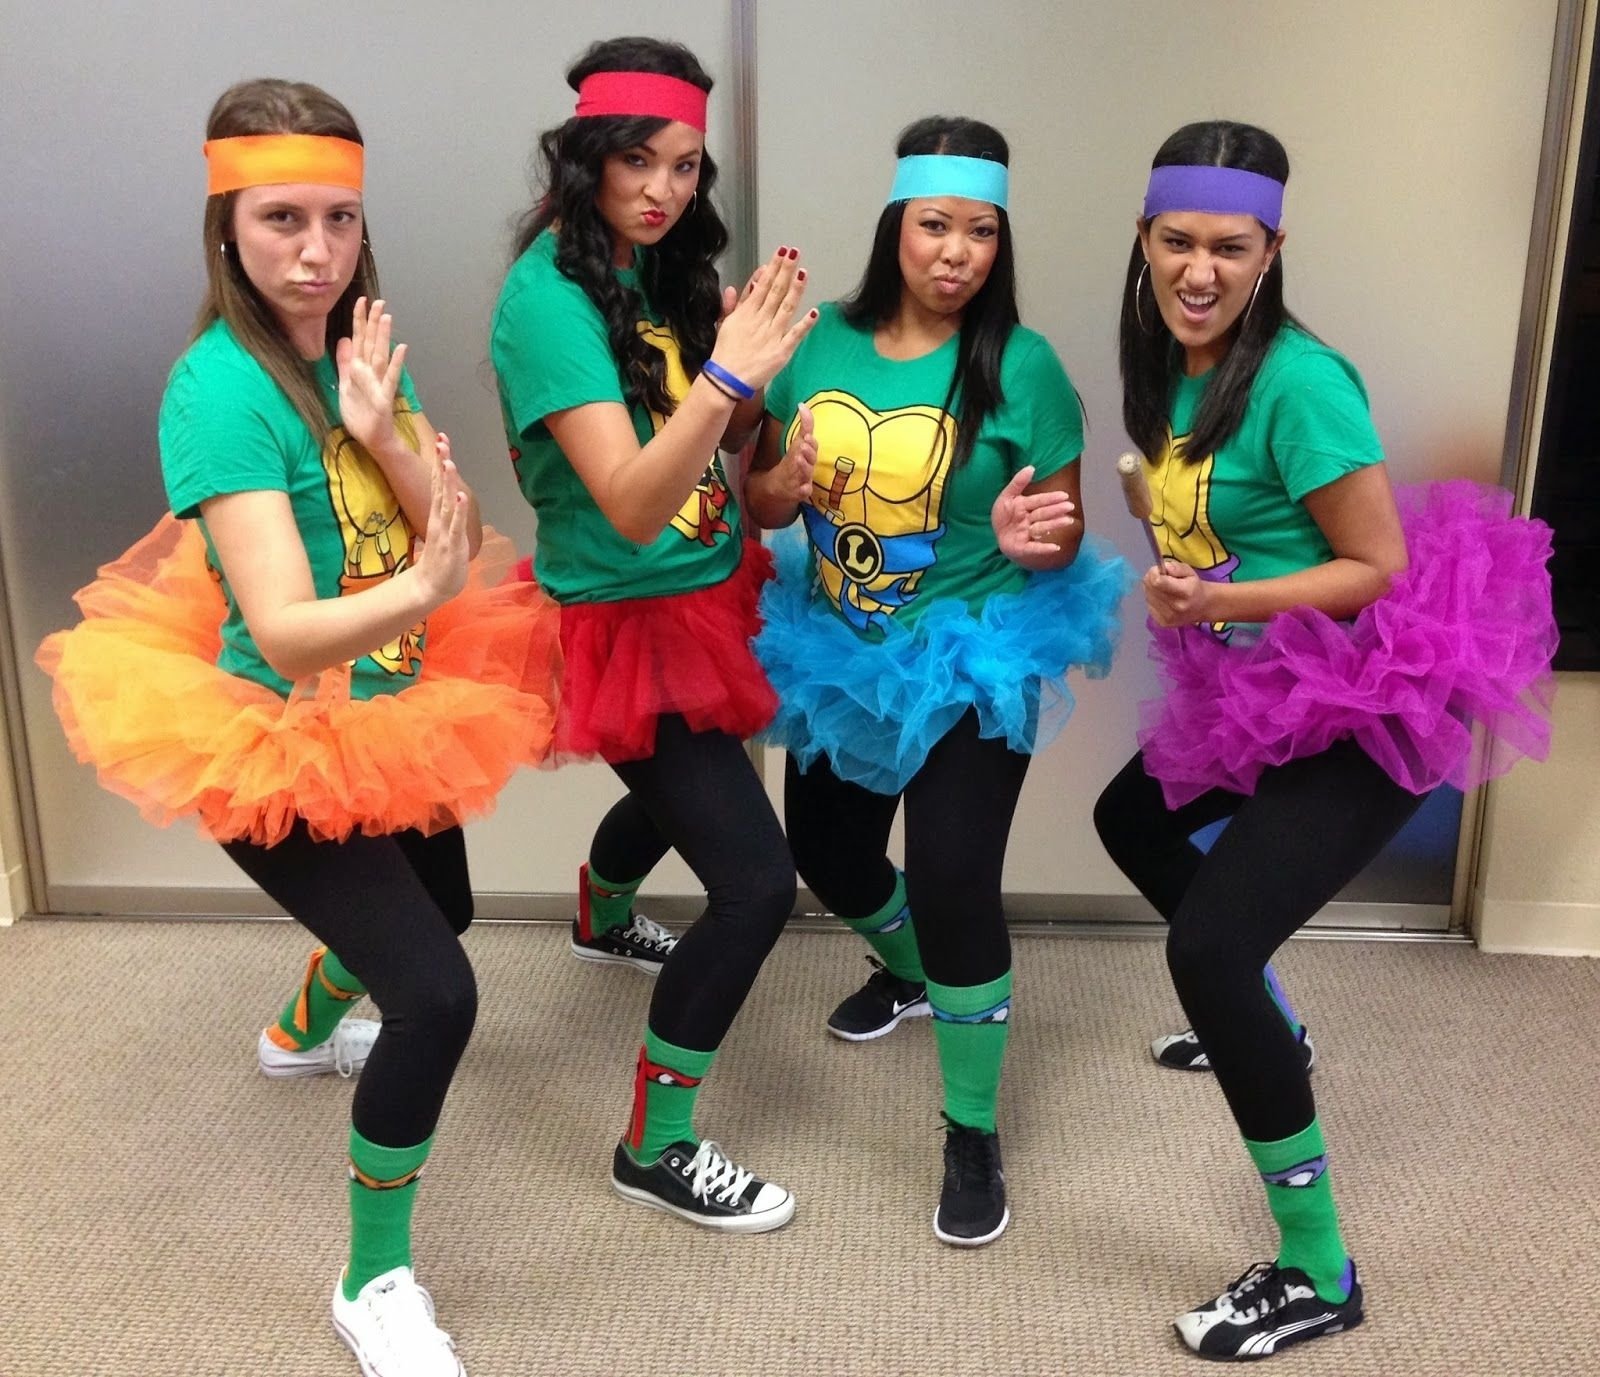 10 Nice Top 2013 Halloween Costume Ideas 26 90s group halloween costumes you and your squad should dress up 7 2022